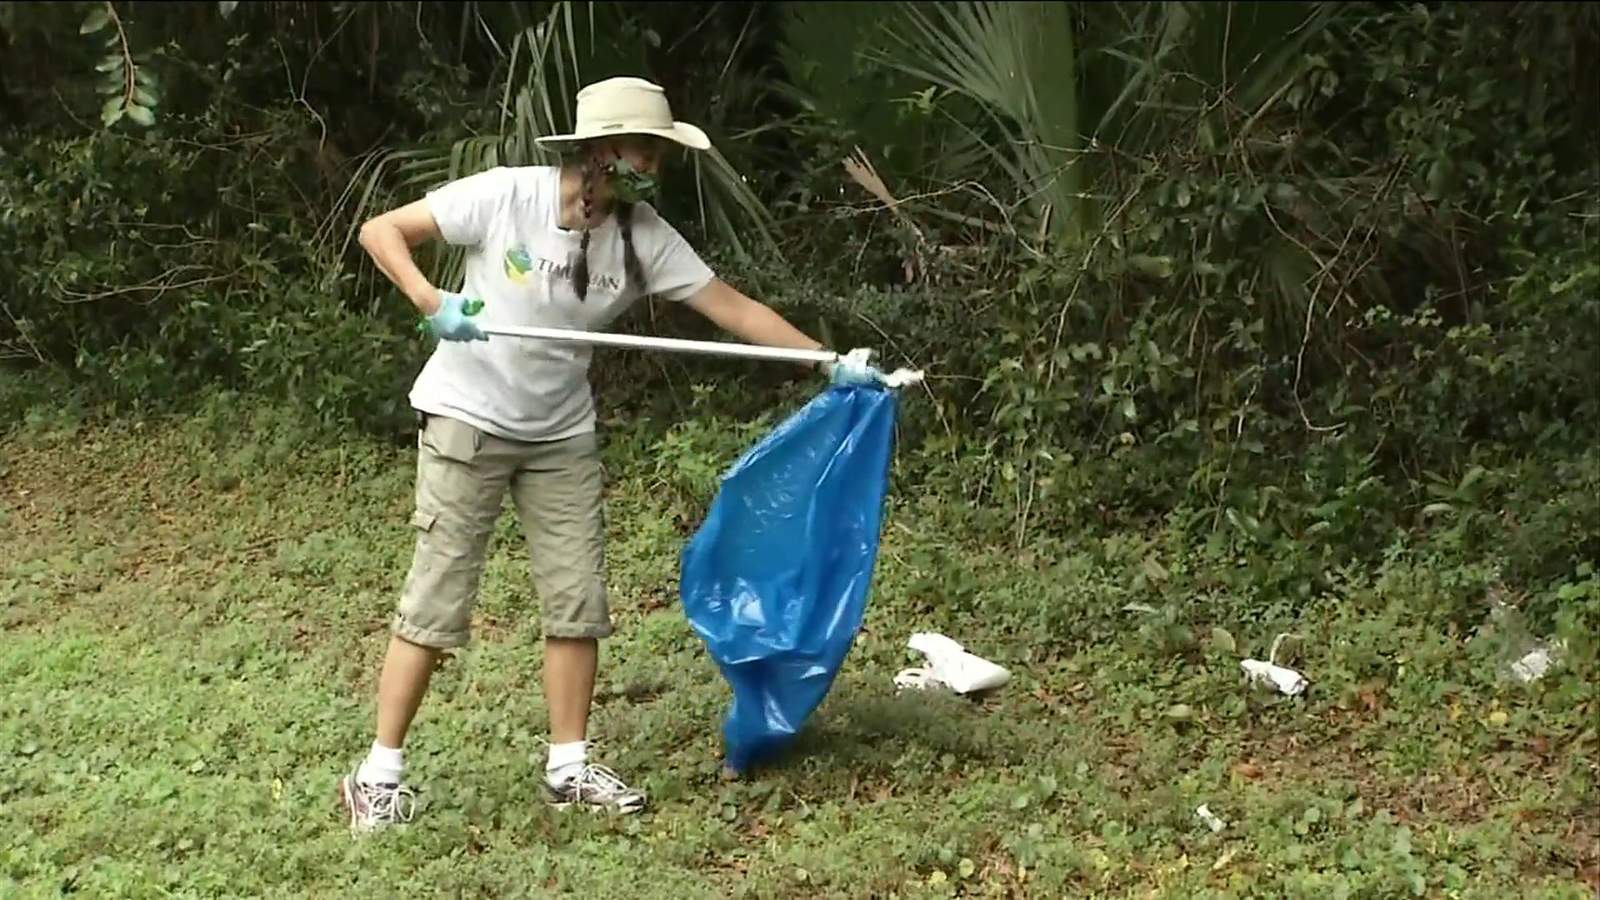 City seeking volunteers for the St. Johns River Cleanup on Saturday